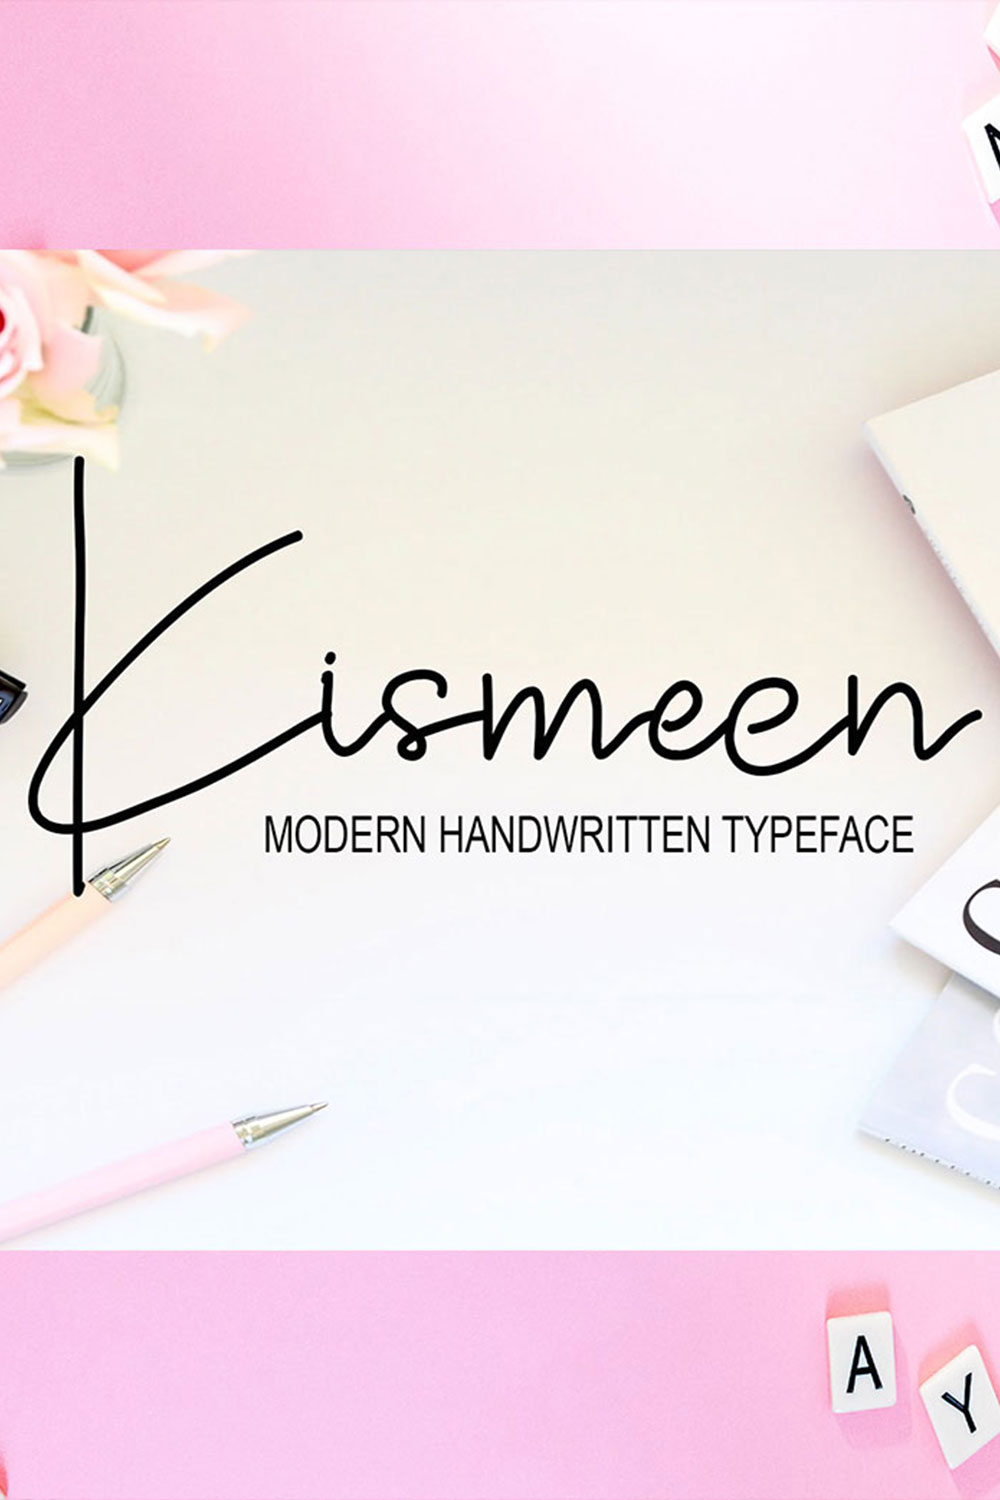 An image with text showing the irresistible Kismeen font.